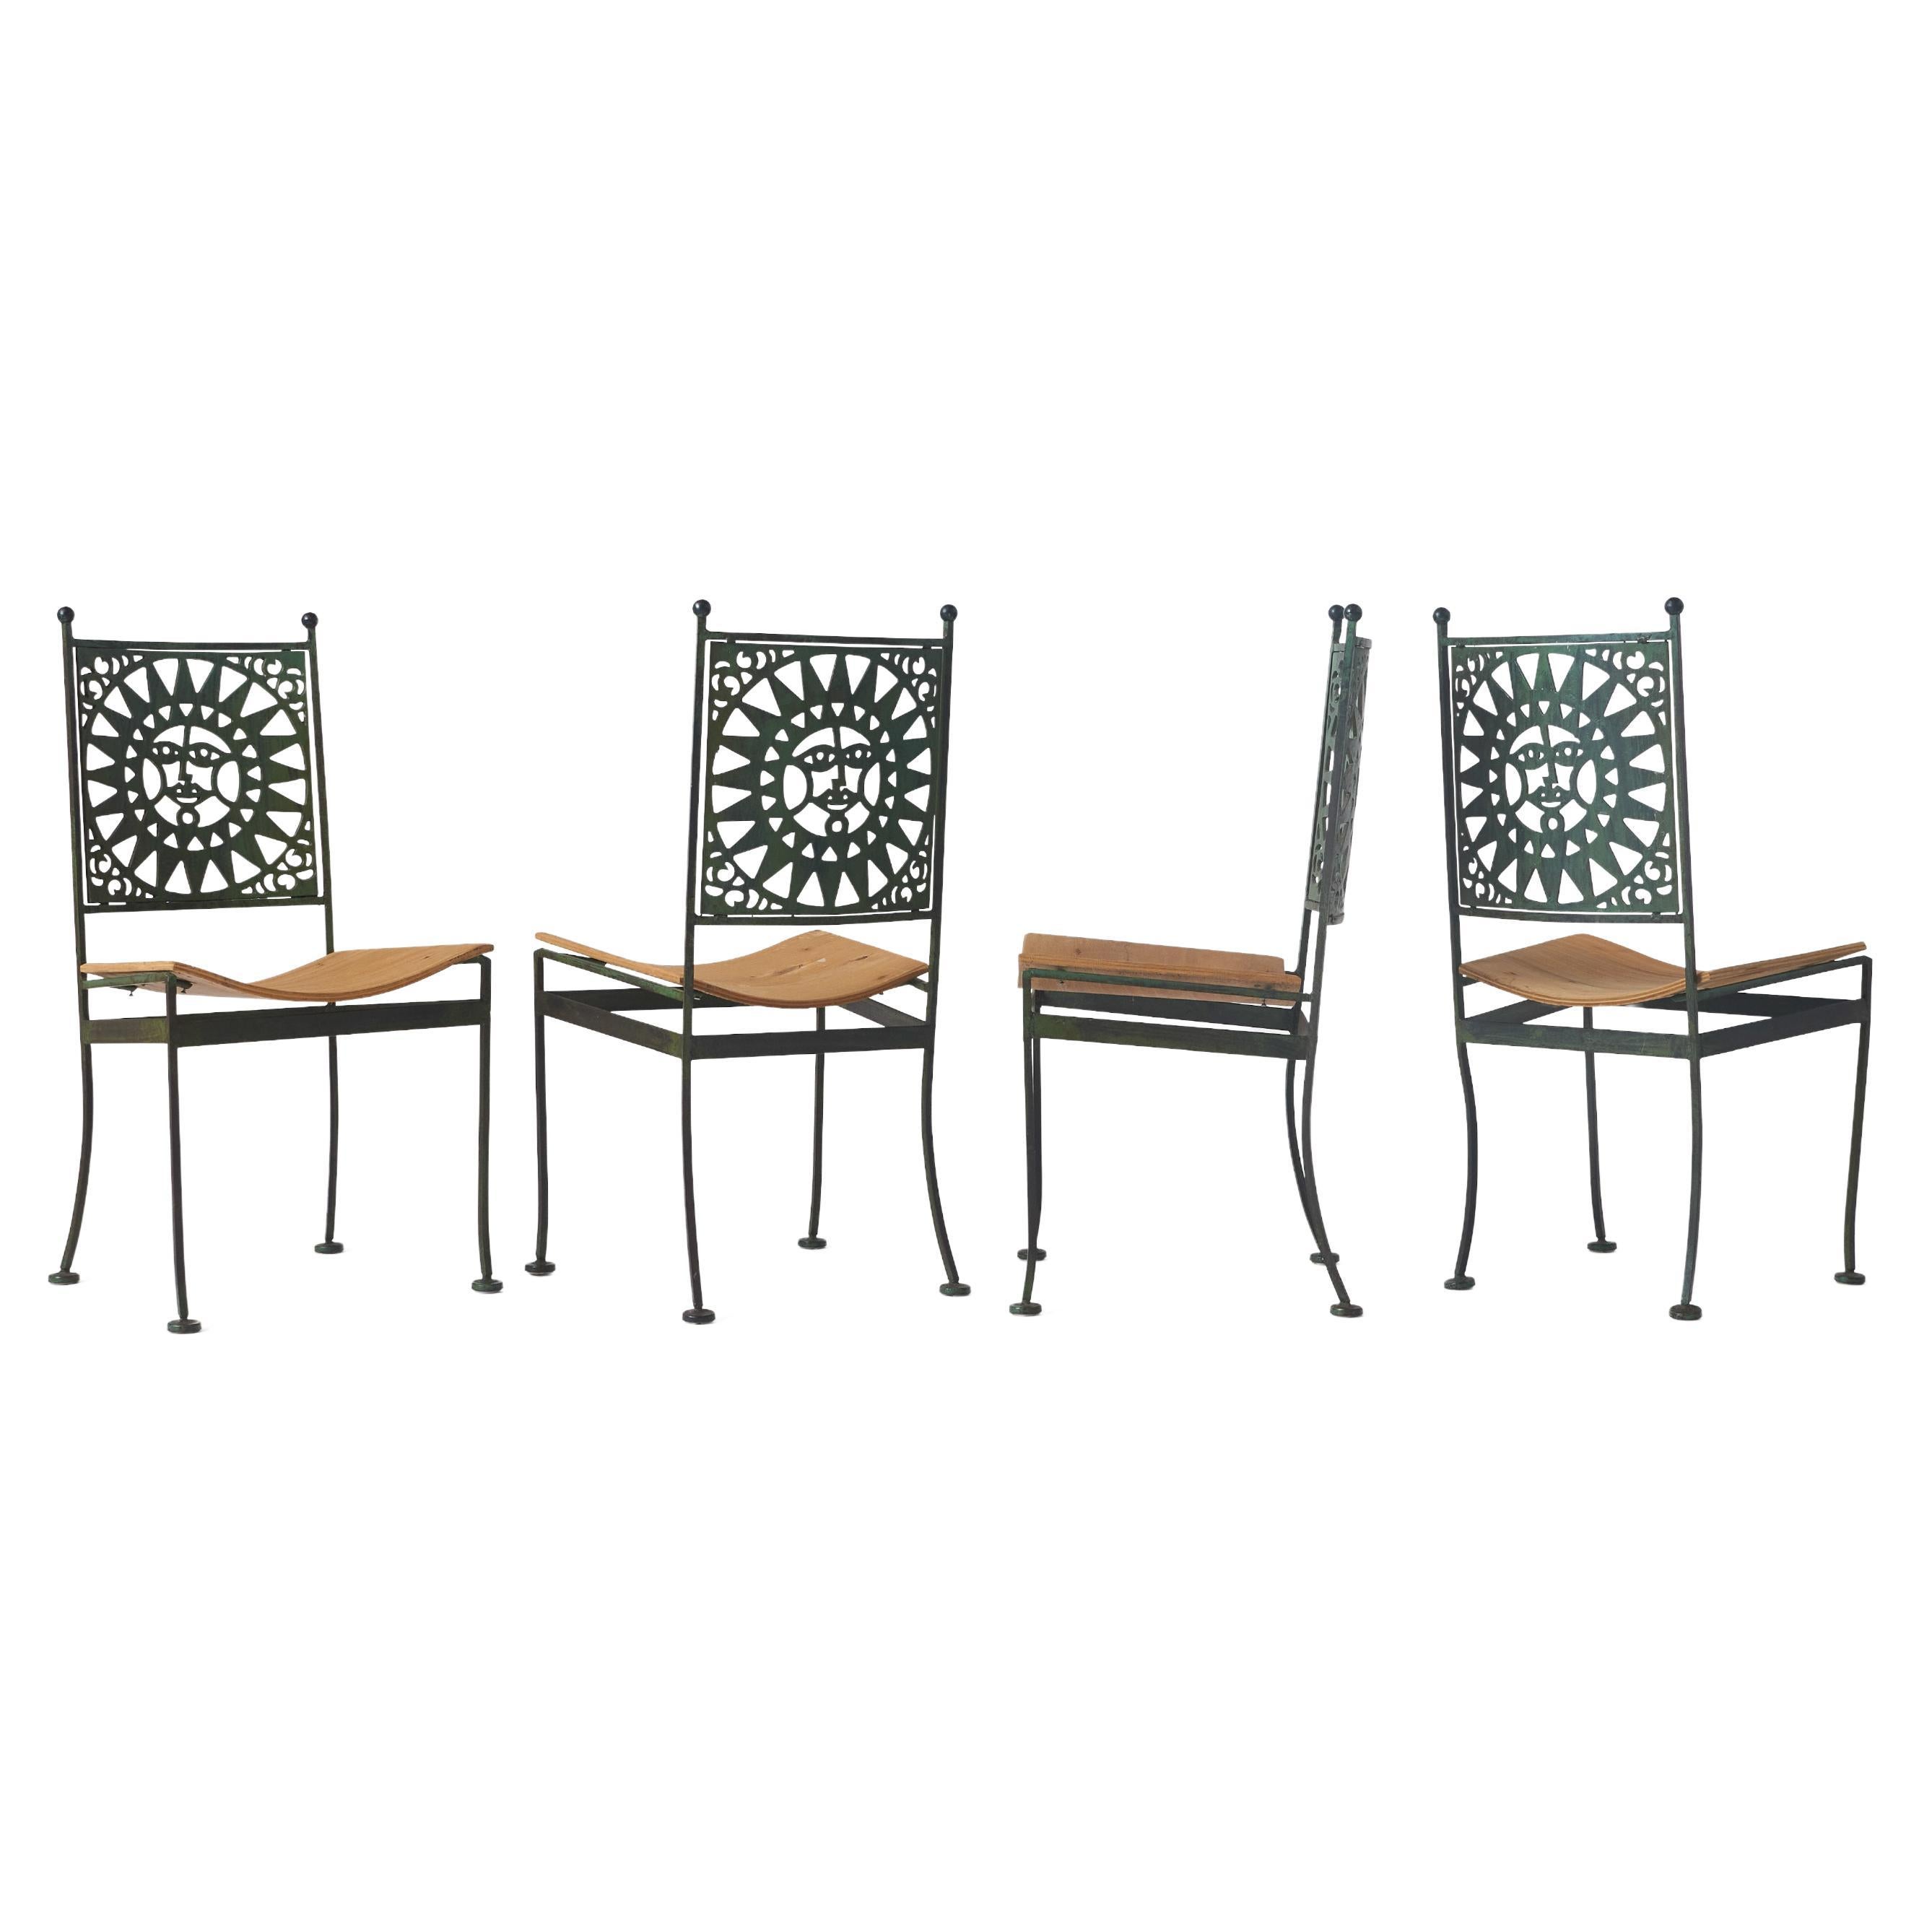 Set of Four Wrought Iron Chairs by Arthur Umanoff